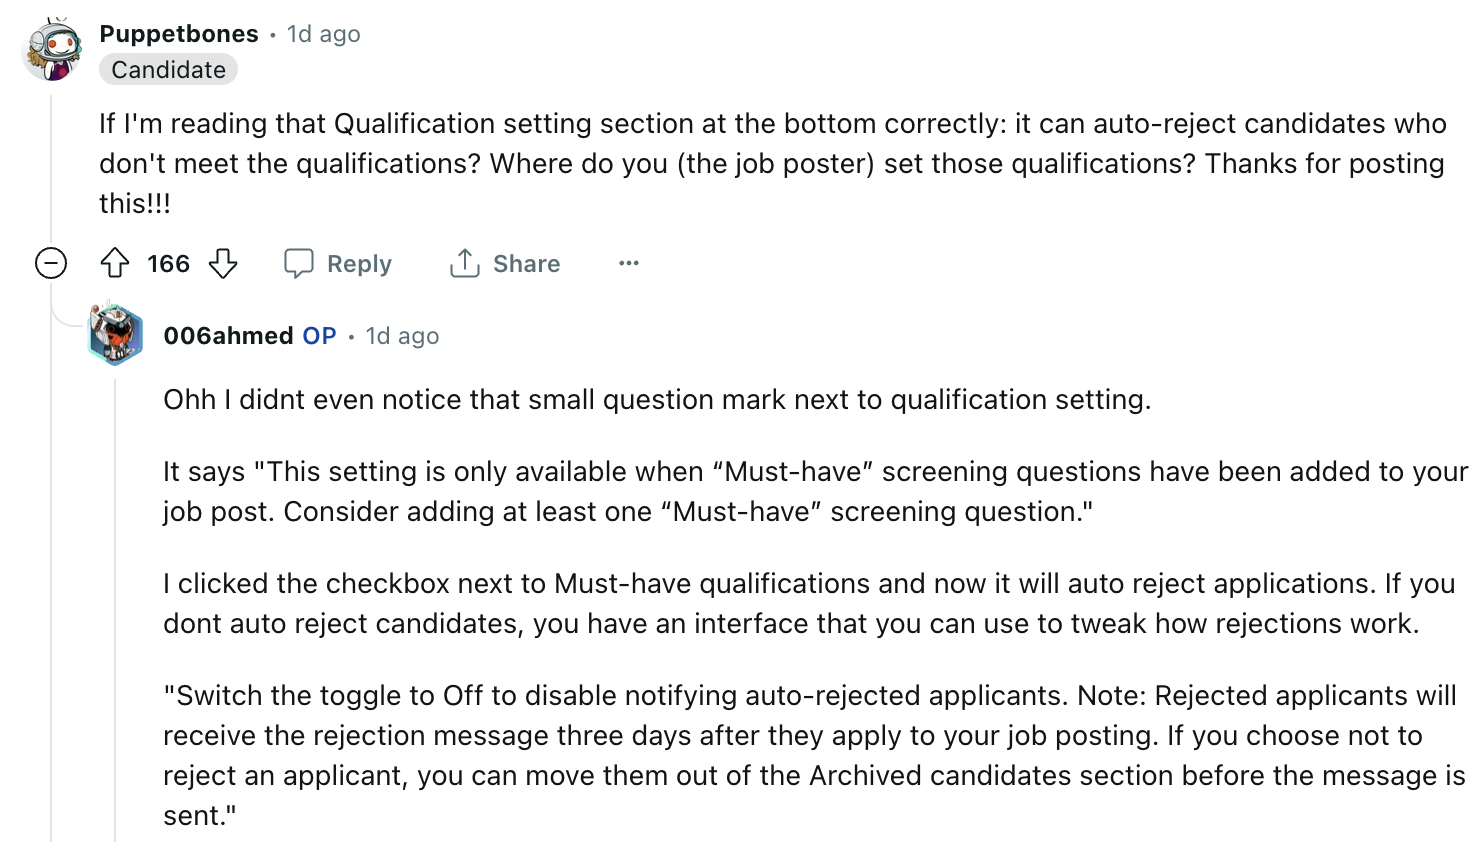 document - Puppetbones id ago Candidate If I'm reading that Qualification setting section at the bottom correctly it can autoreject candidates who don't meet the qualifications? Where do you the job poster set those qualifications? Thanks for posting this